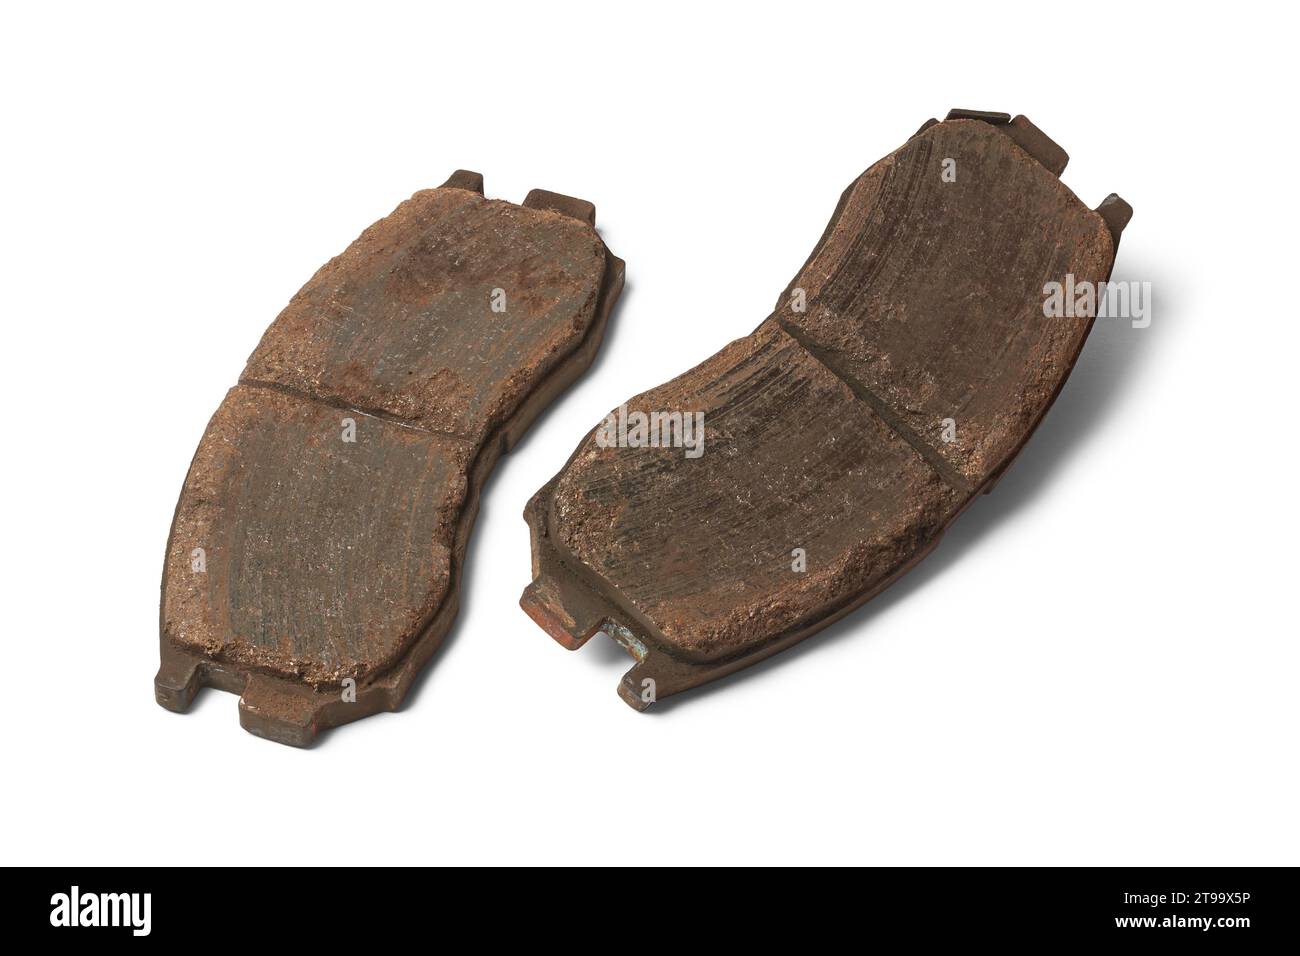 pair of old worn out car disc brake pads, components of vehicle braking system, made of friction materials that grip brake disc or rotor isolated Stock Photo